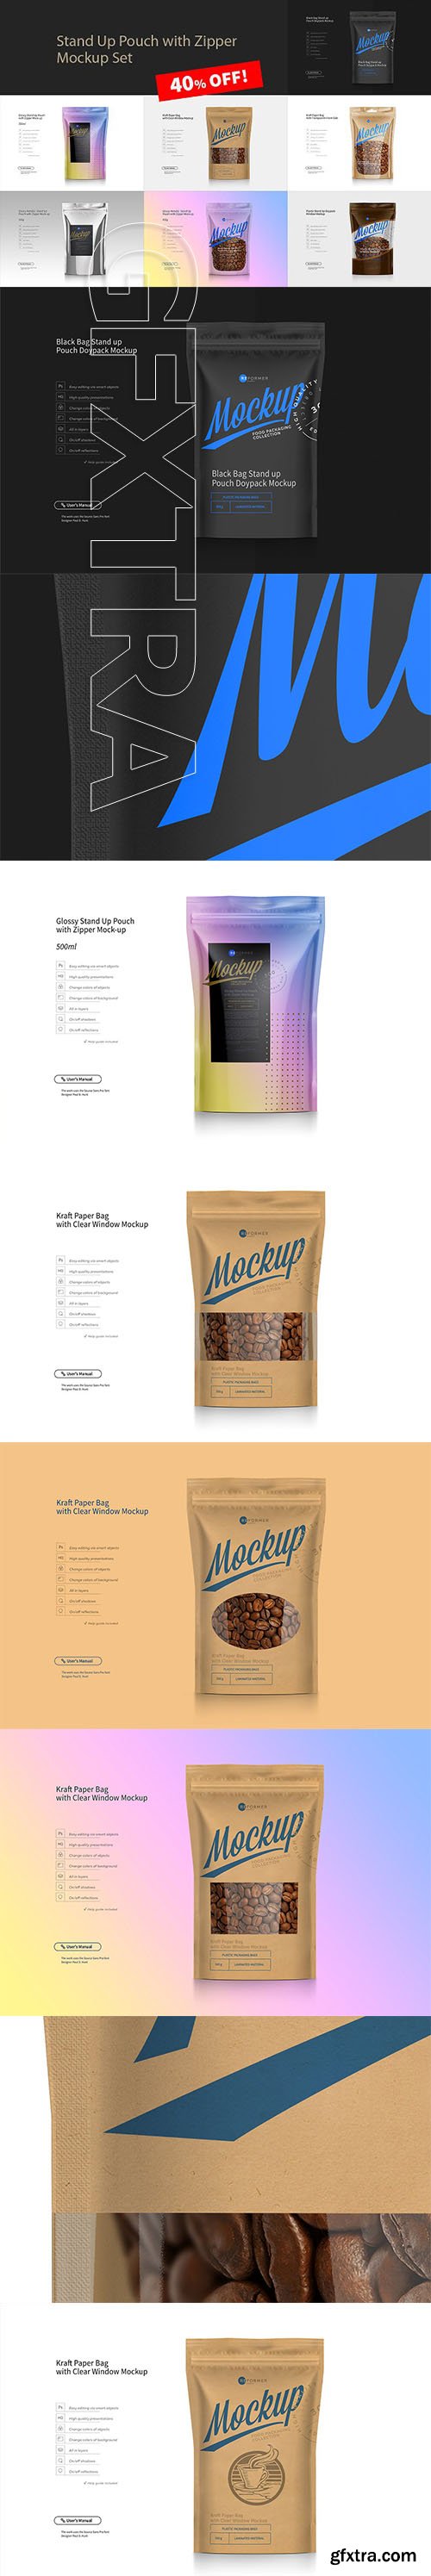 CreativeMarket - Stand Up Pouch Mockup Set 2857913